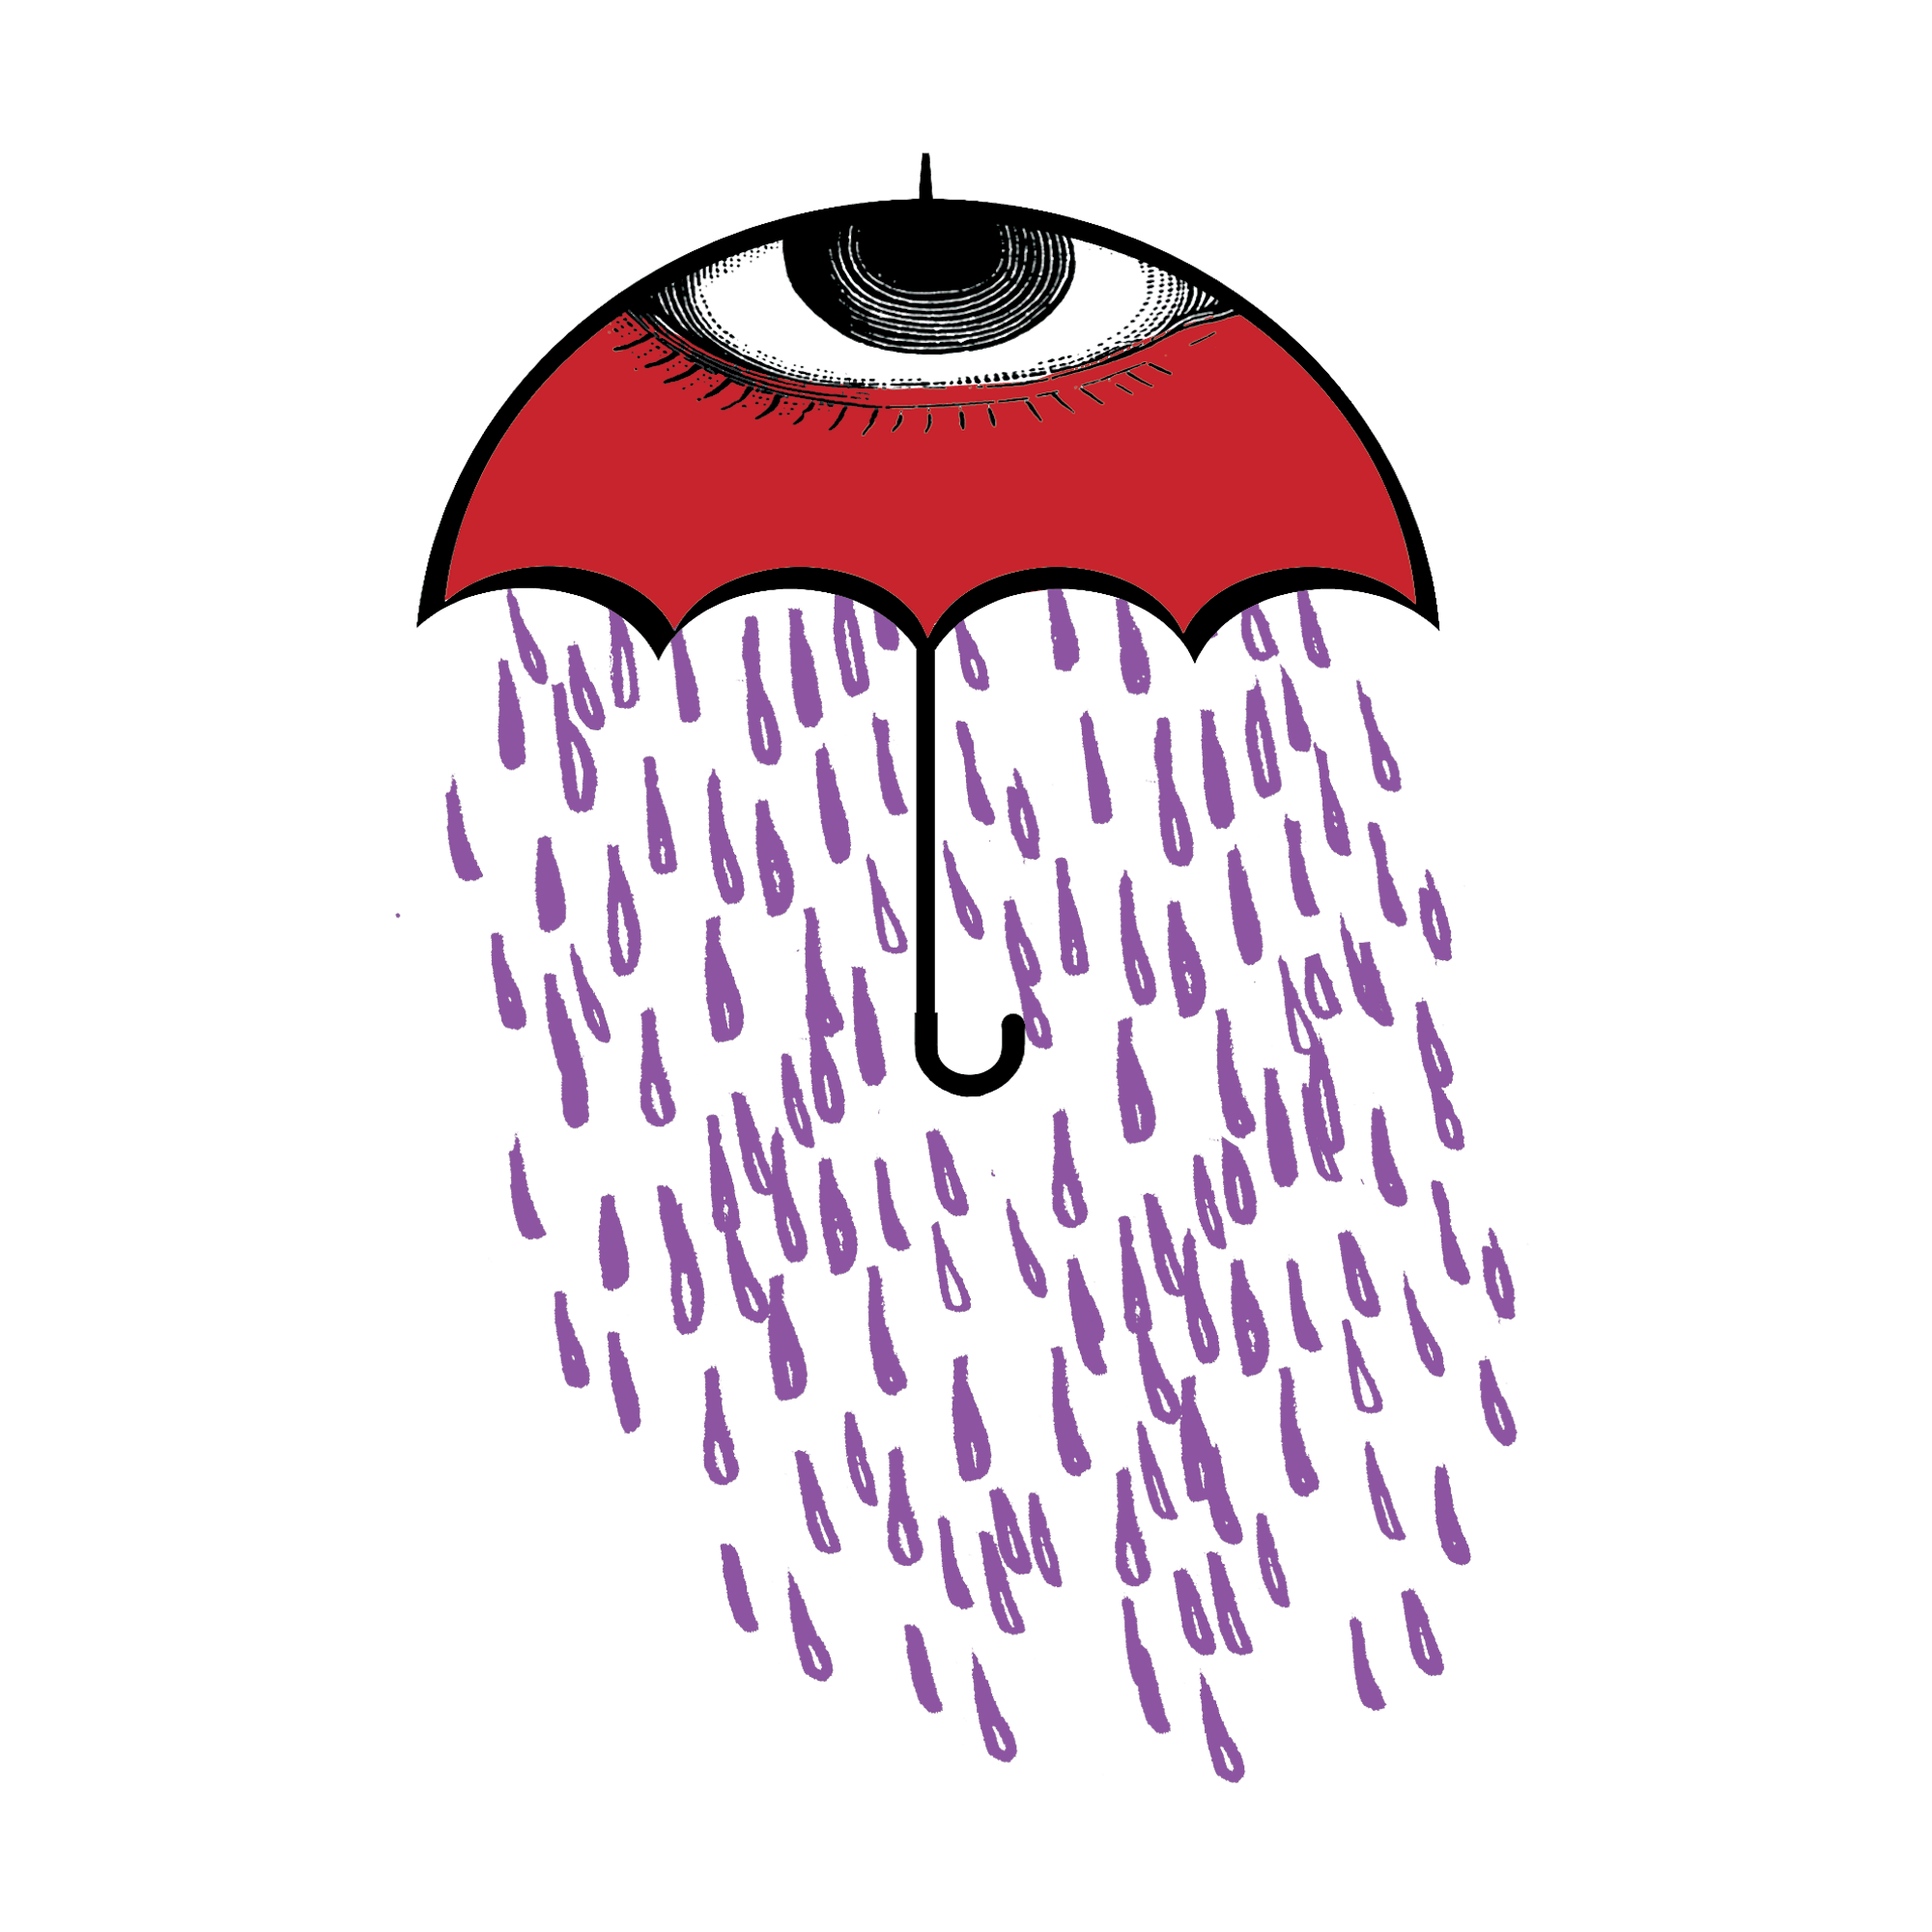 A red umbrella with a black and white eye on the top rains purple rain. 